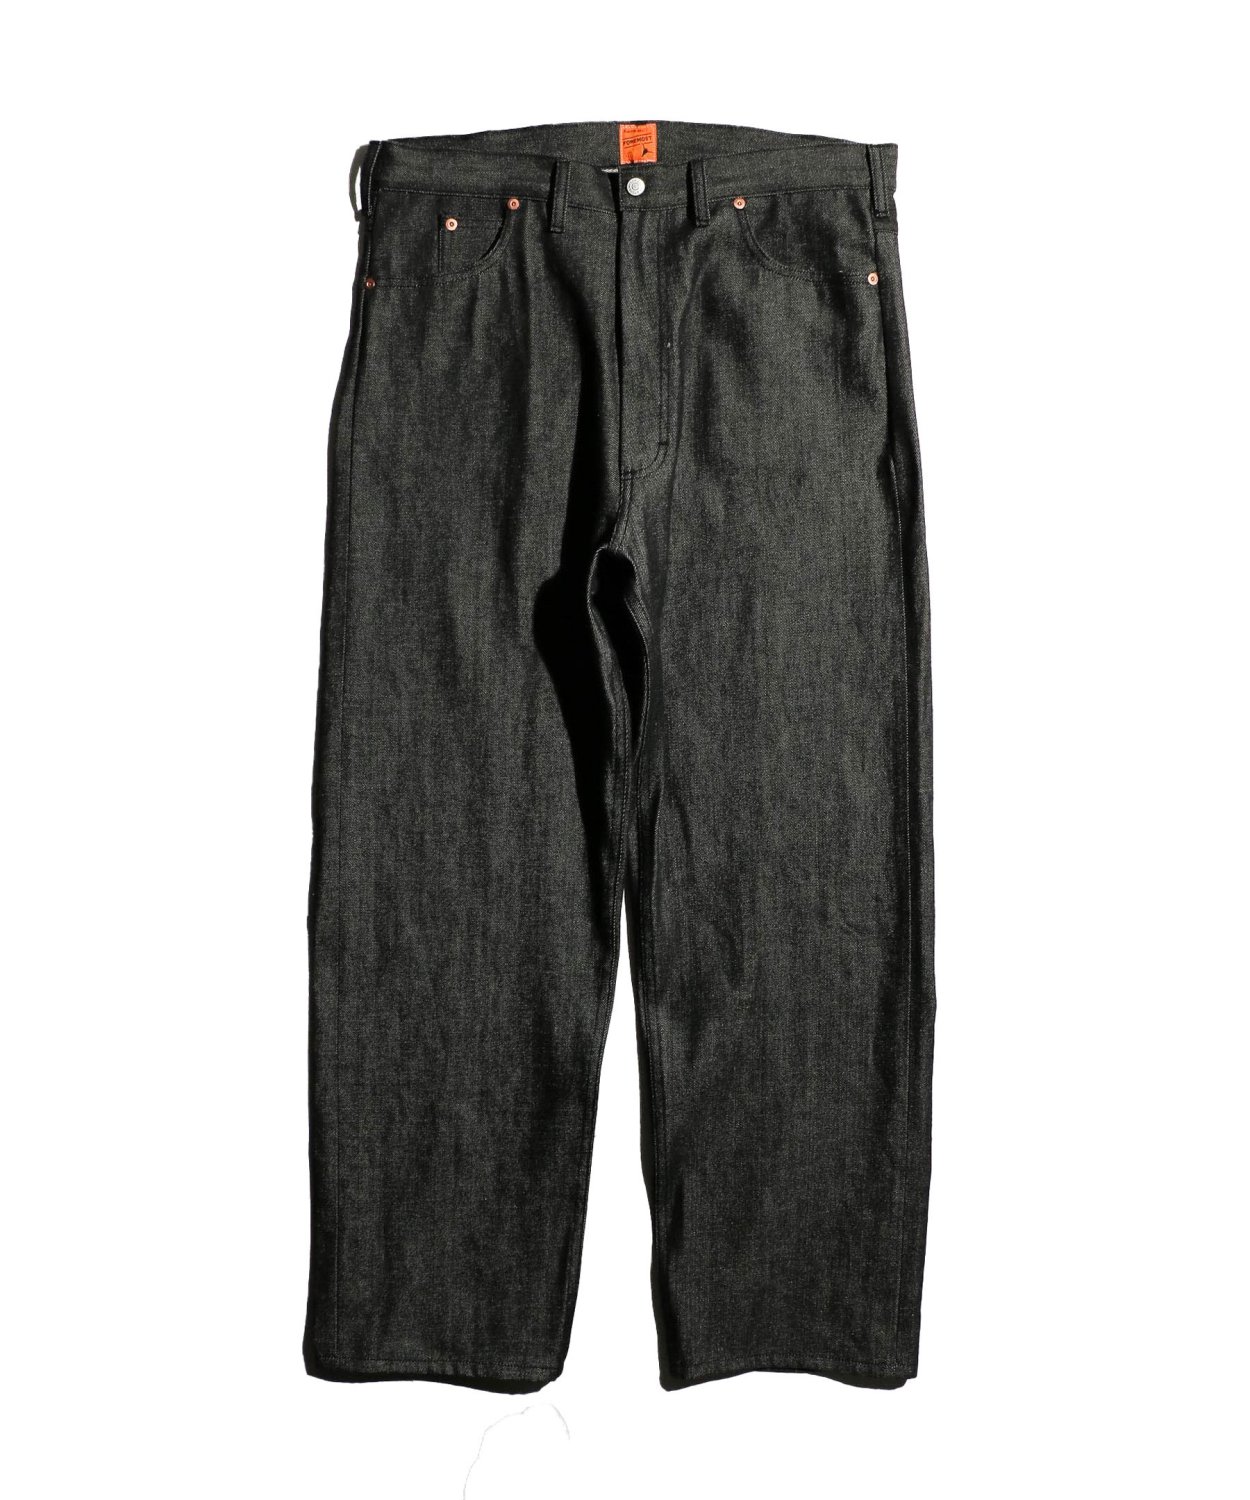 PENNEY'S FOREMOST / 5POCKET PANT RIGID